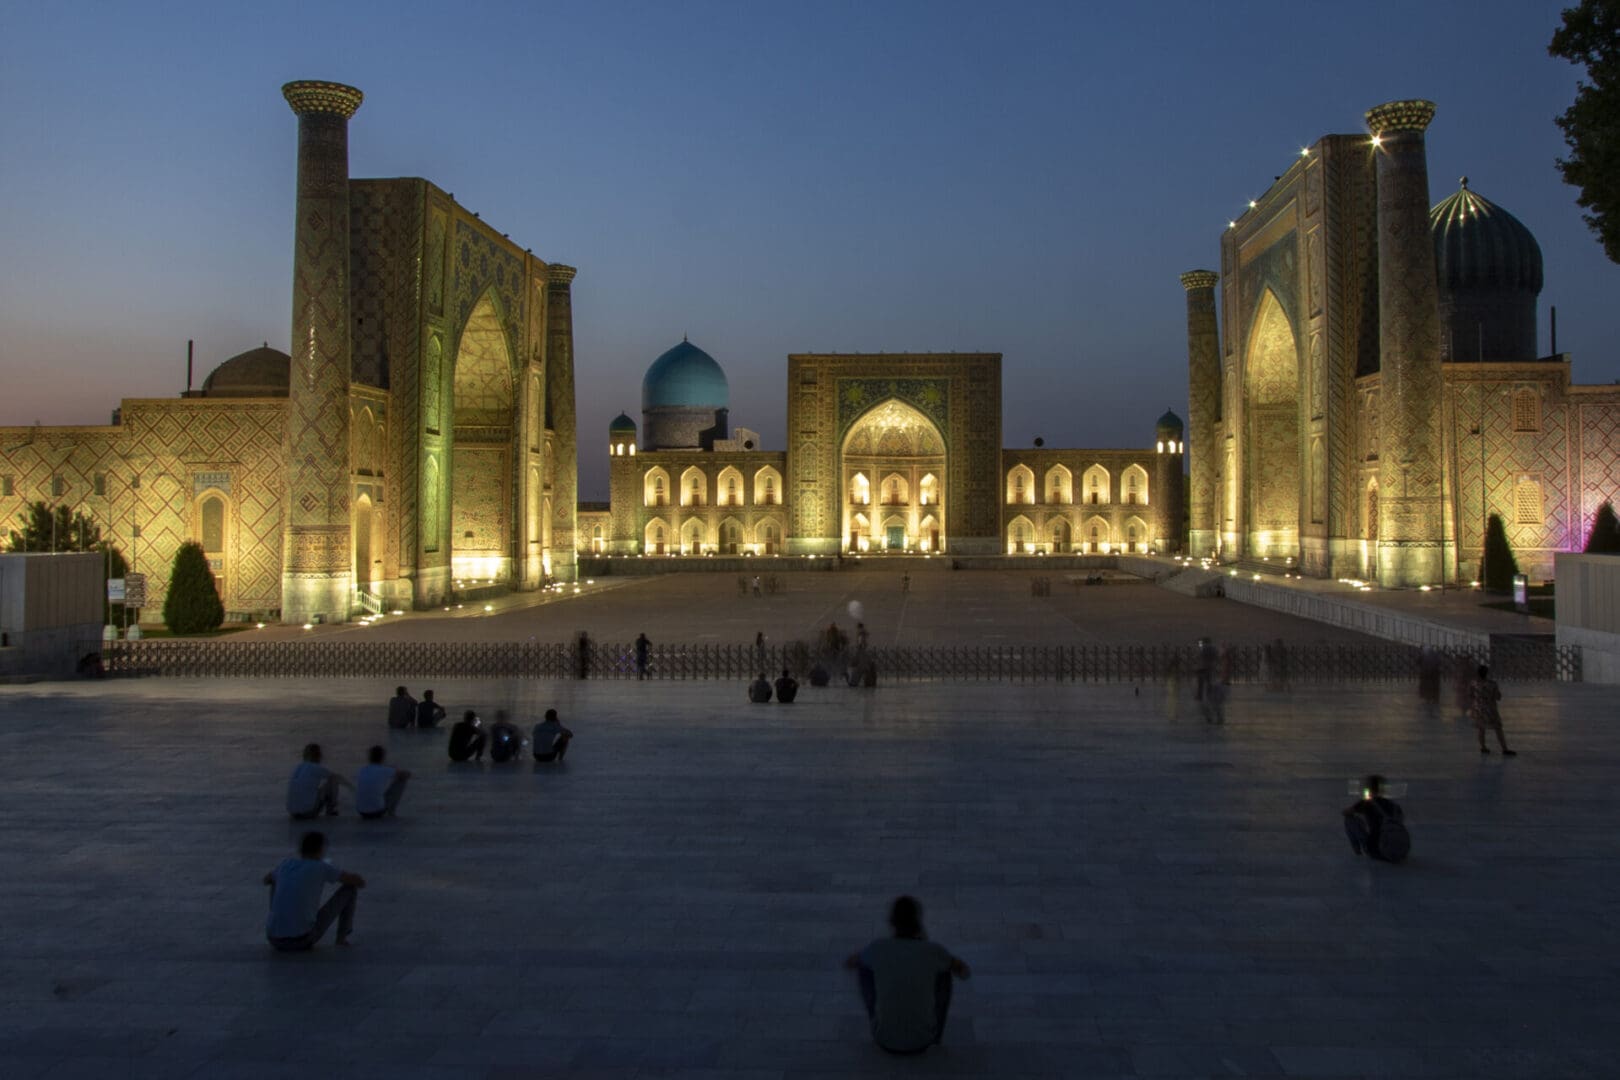 People are sitting in the courtyard of a mosque at dusk.